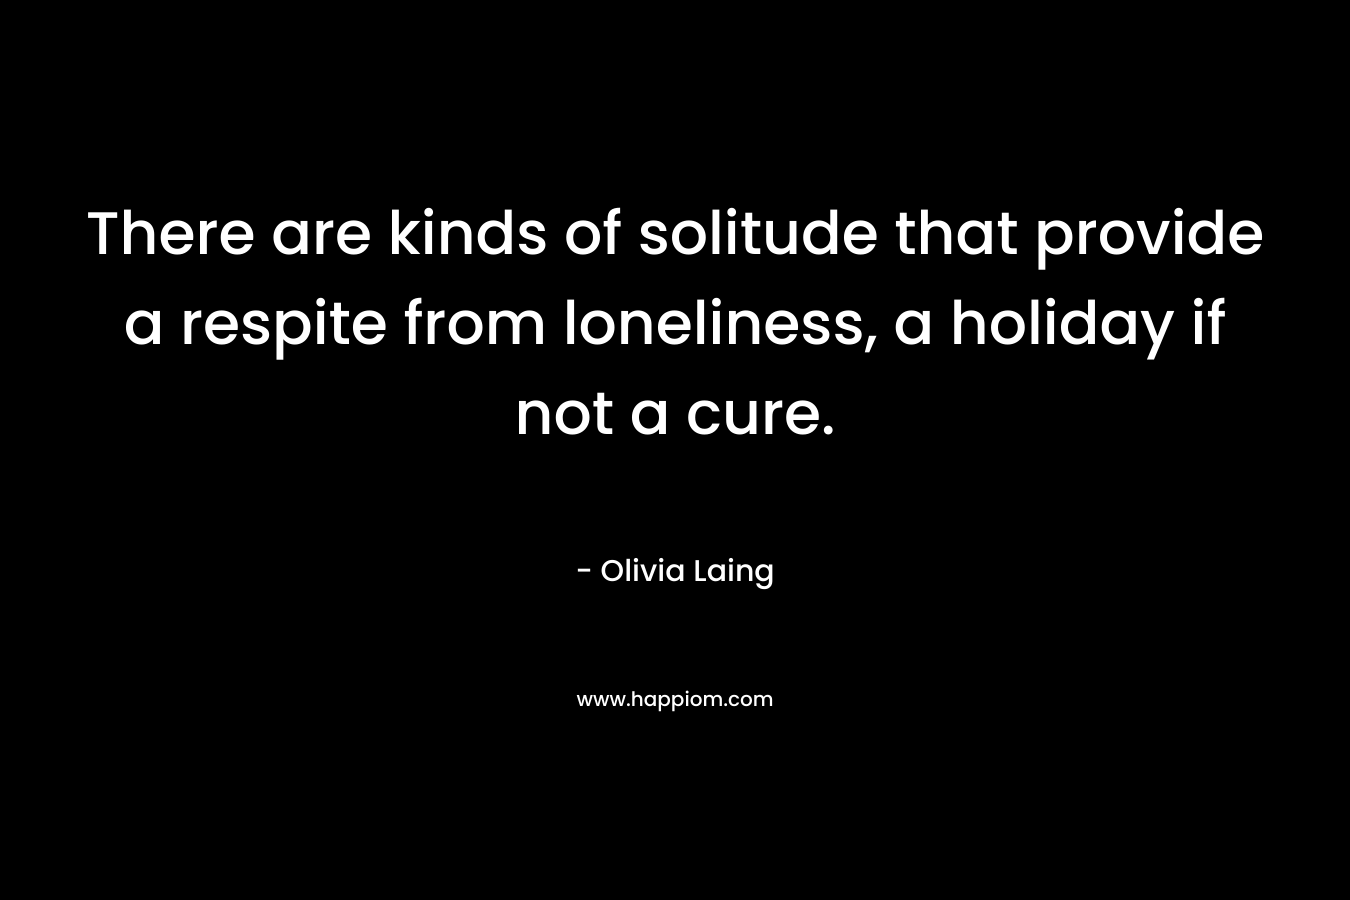 There are kinds of solitude that provide a respite from loneliness, a holiday if not a cure. – Olivia Laing